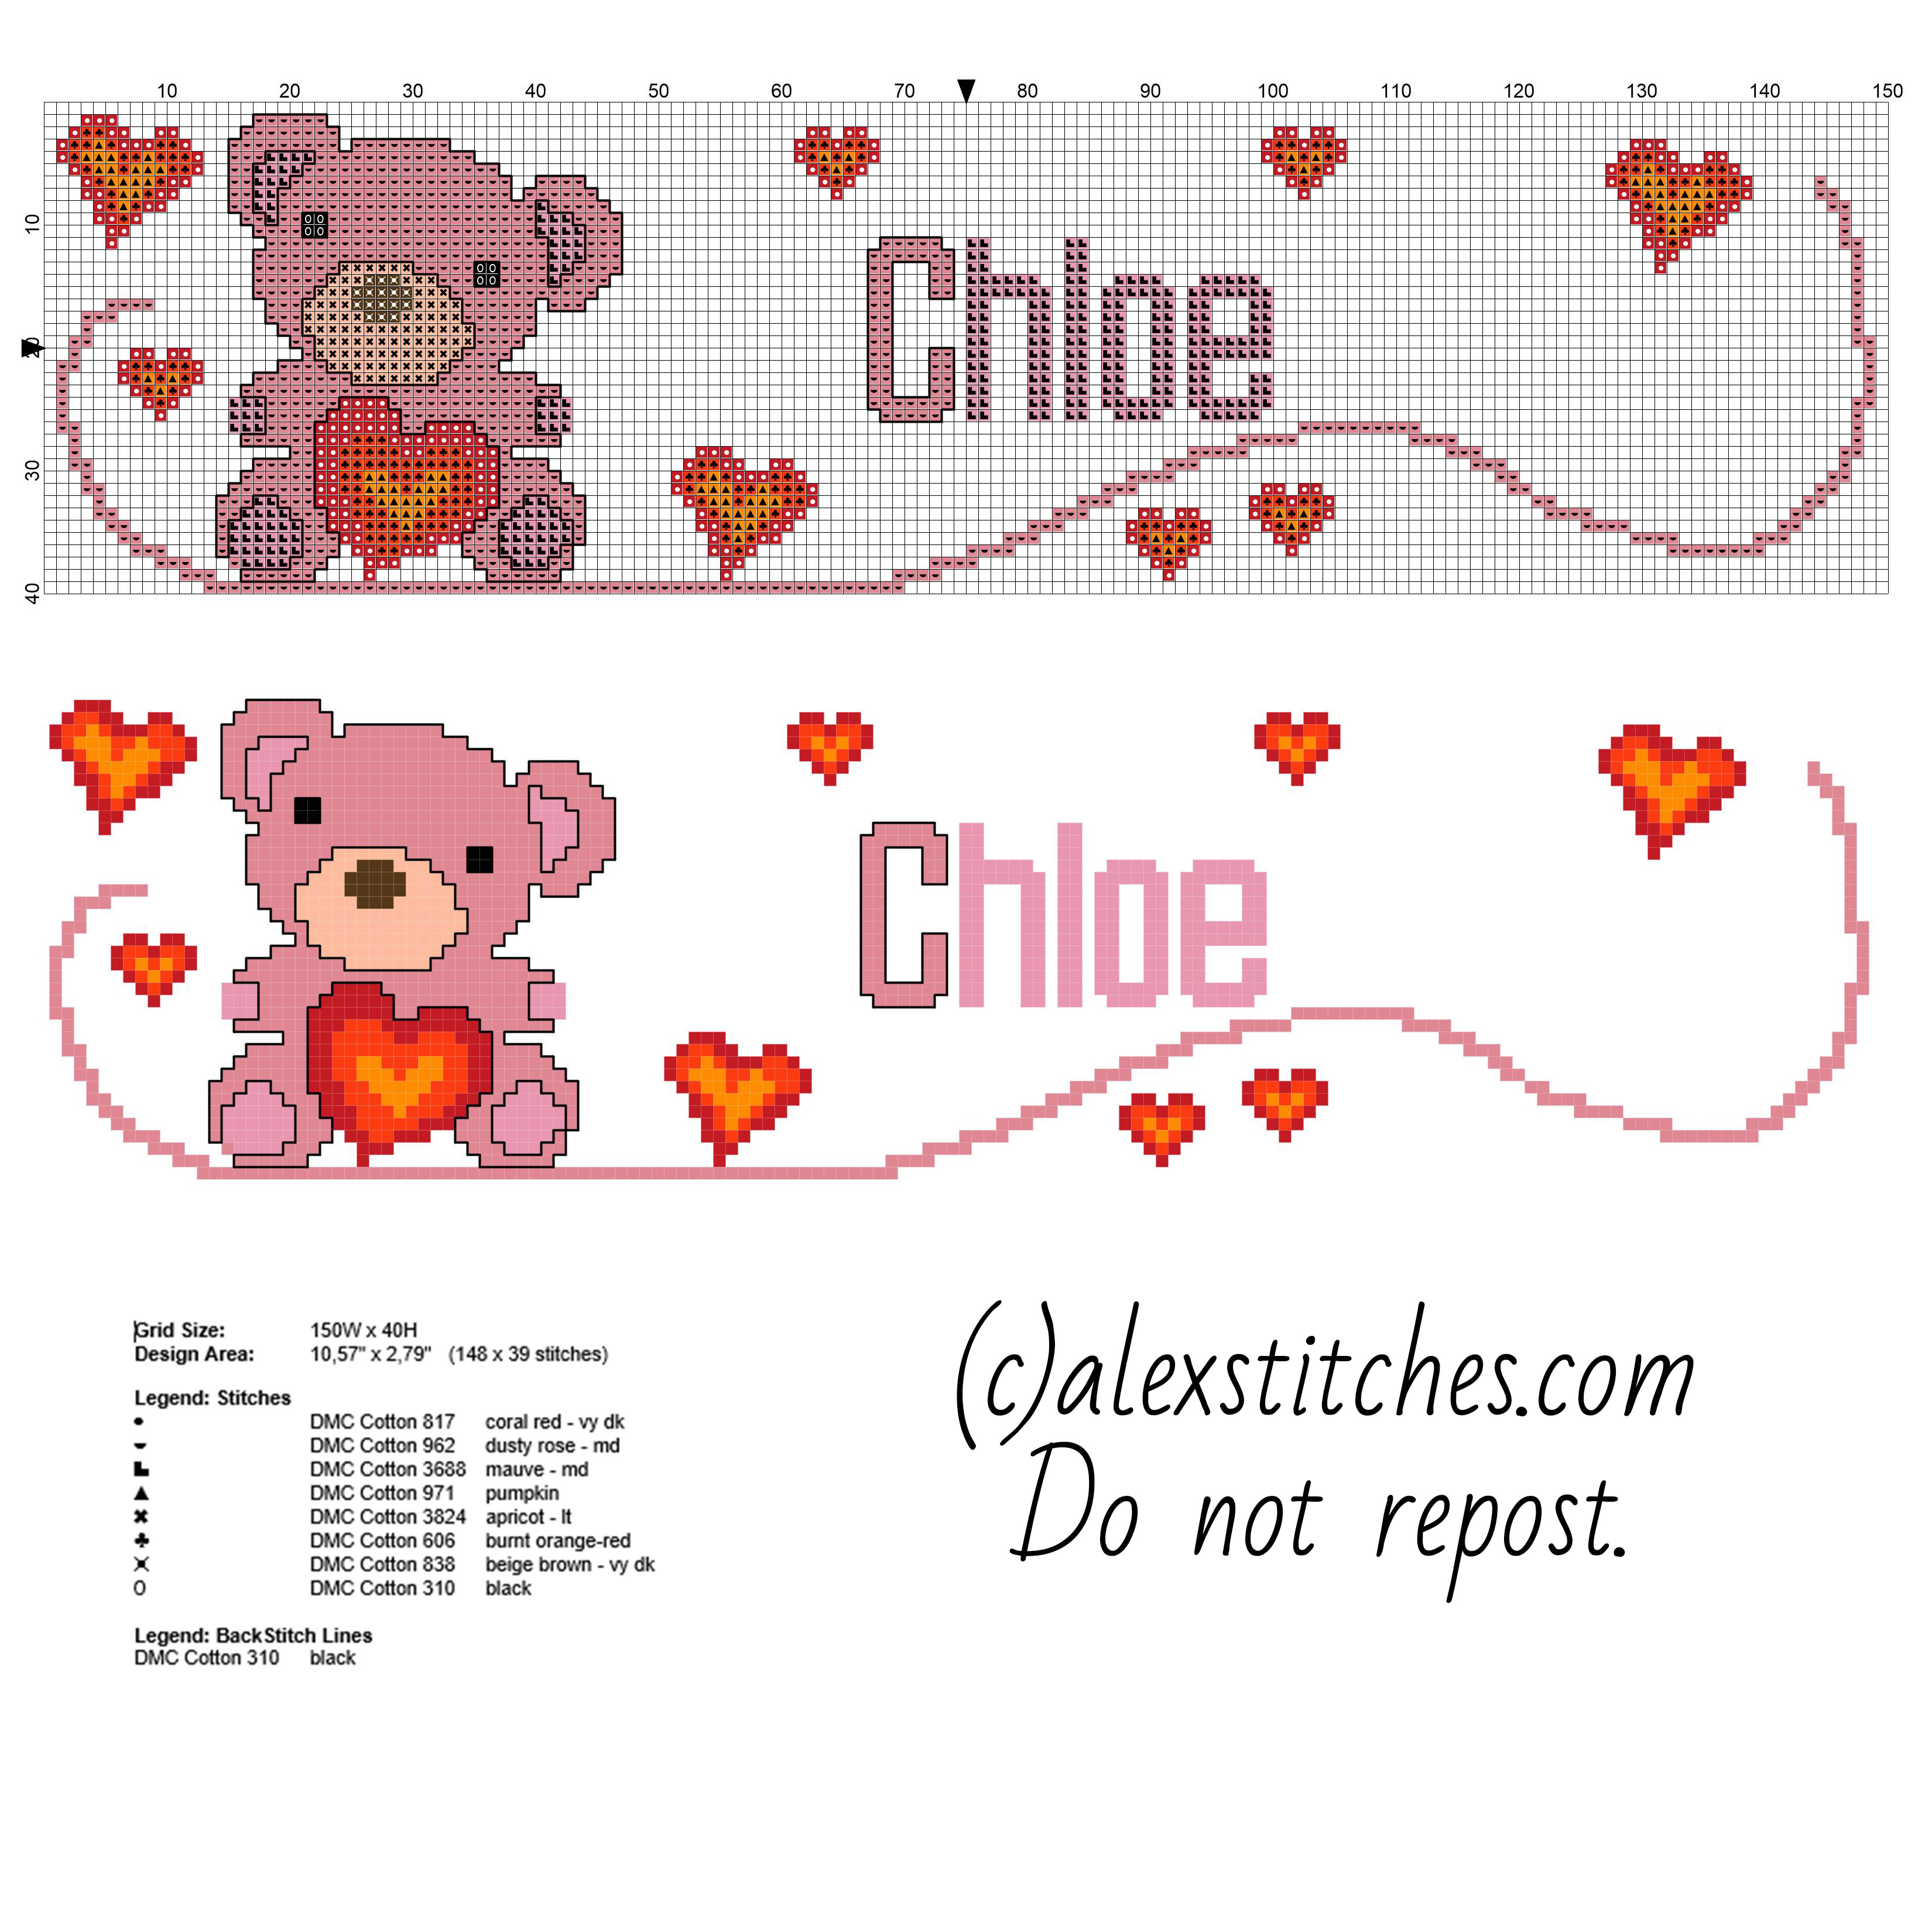 Cross stitch baby name Chloe with a sweet teddy bear free download